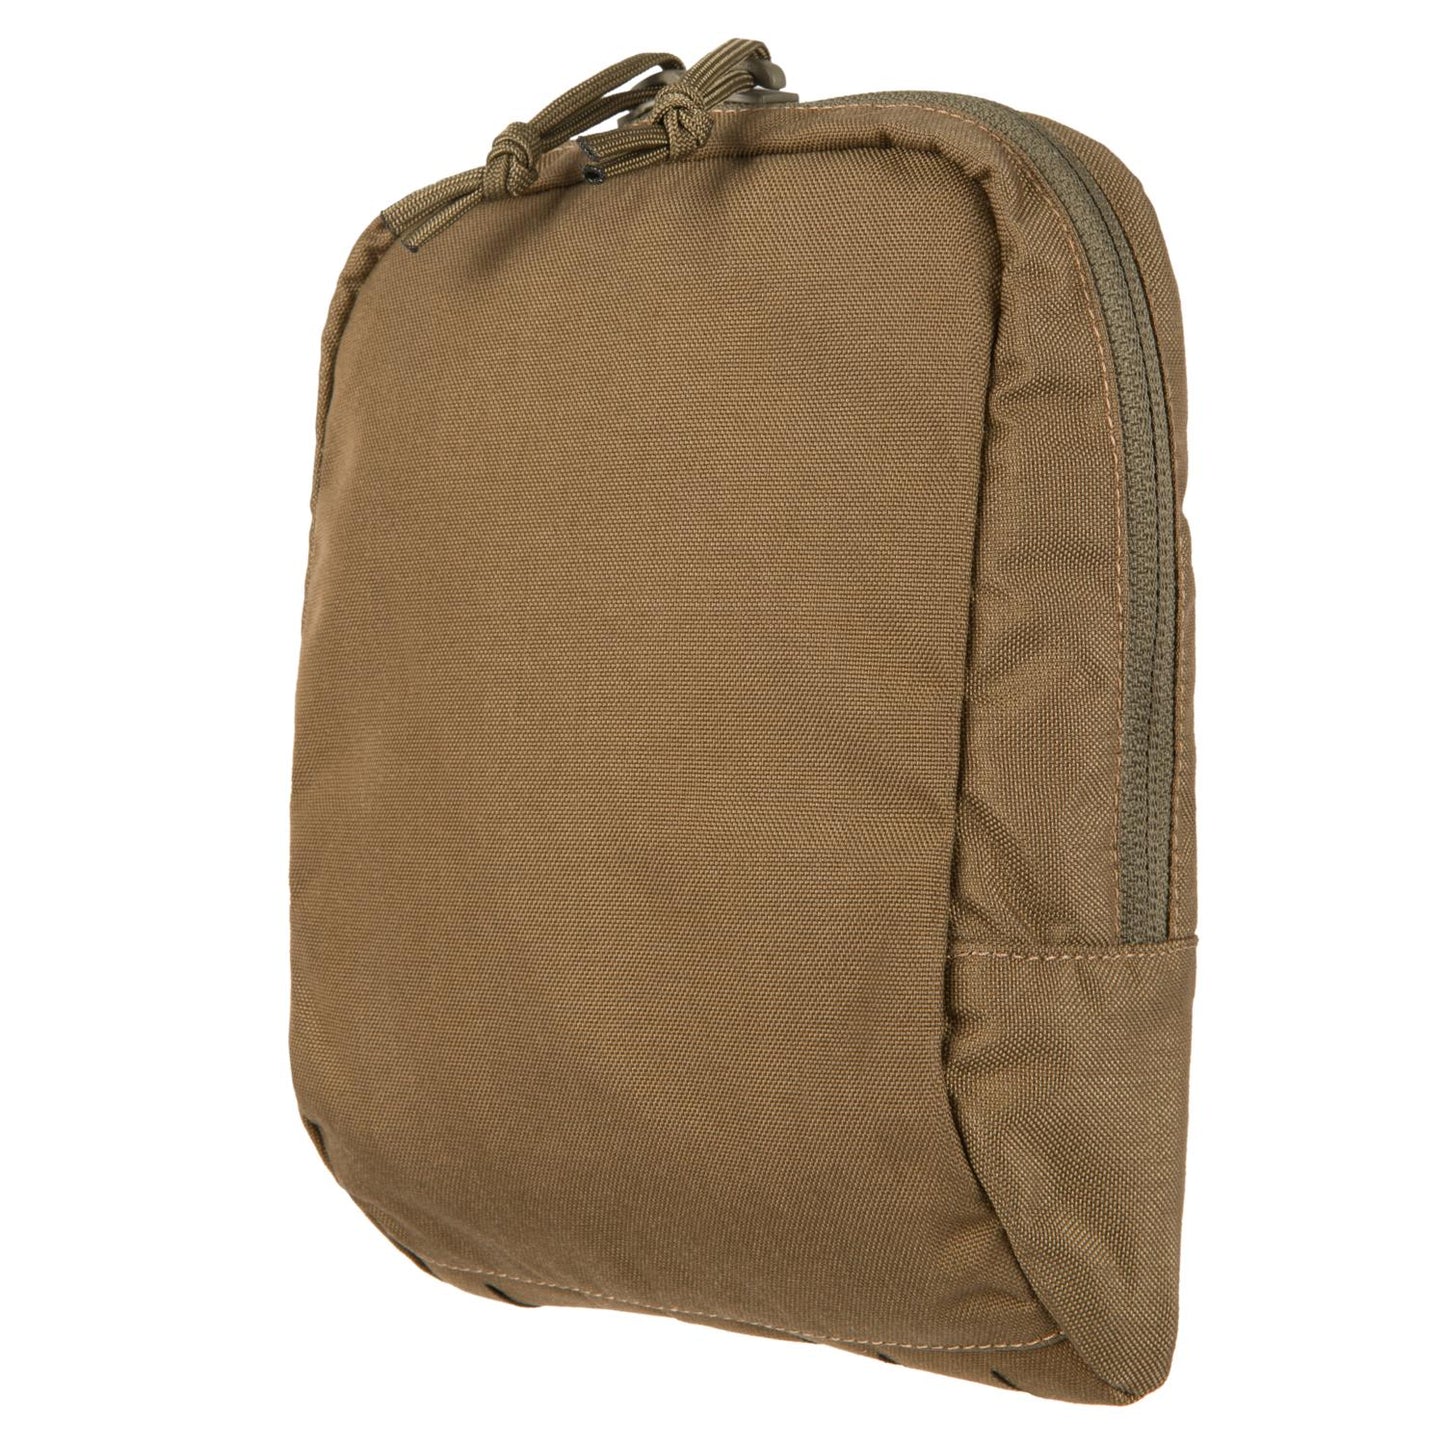 DIRECT ACTION UTILITY POUCH LARGE